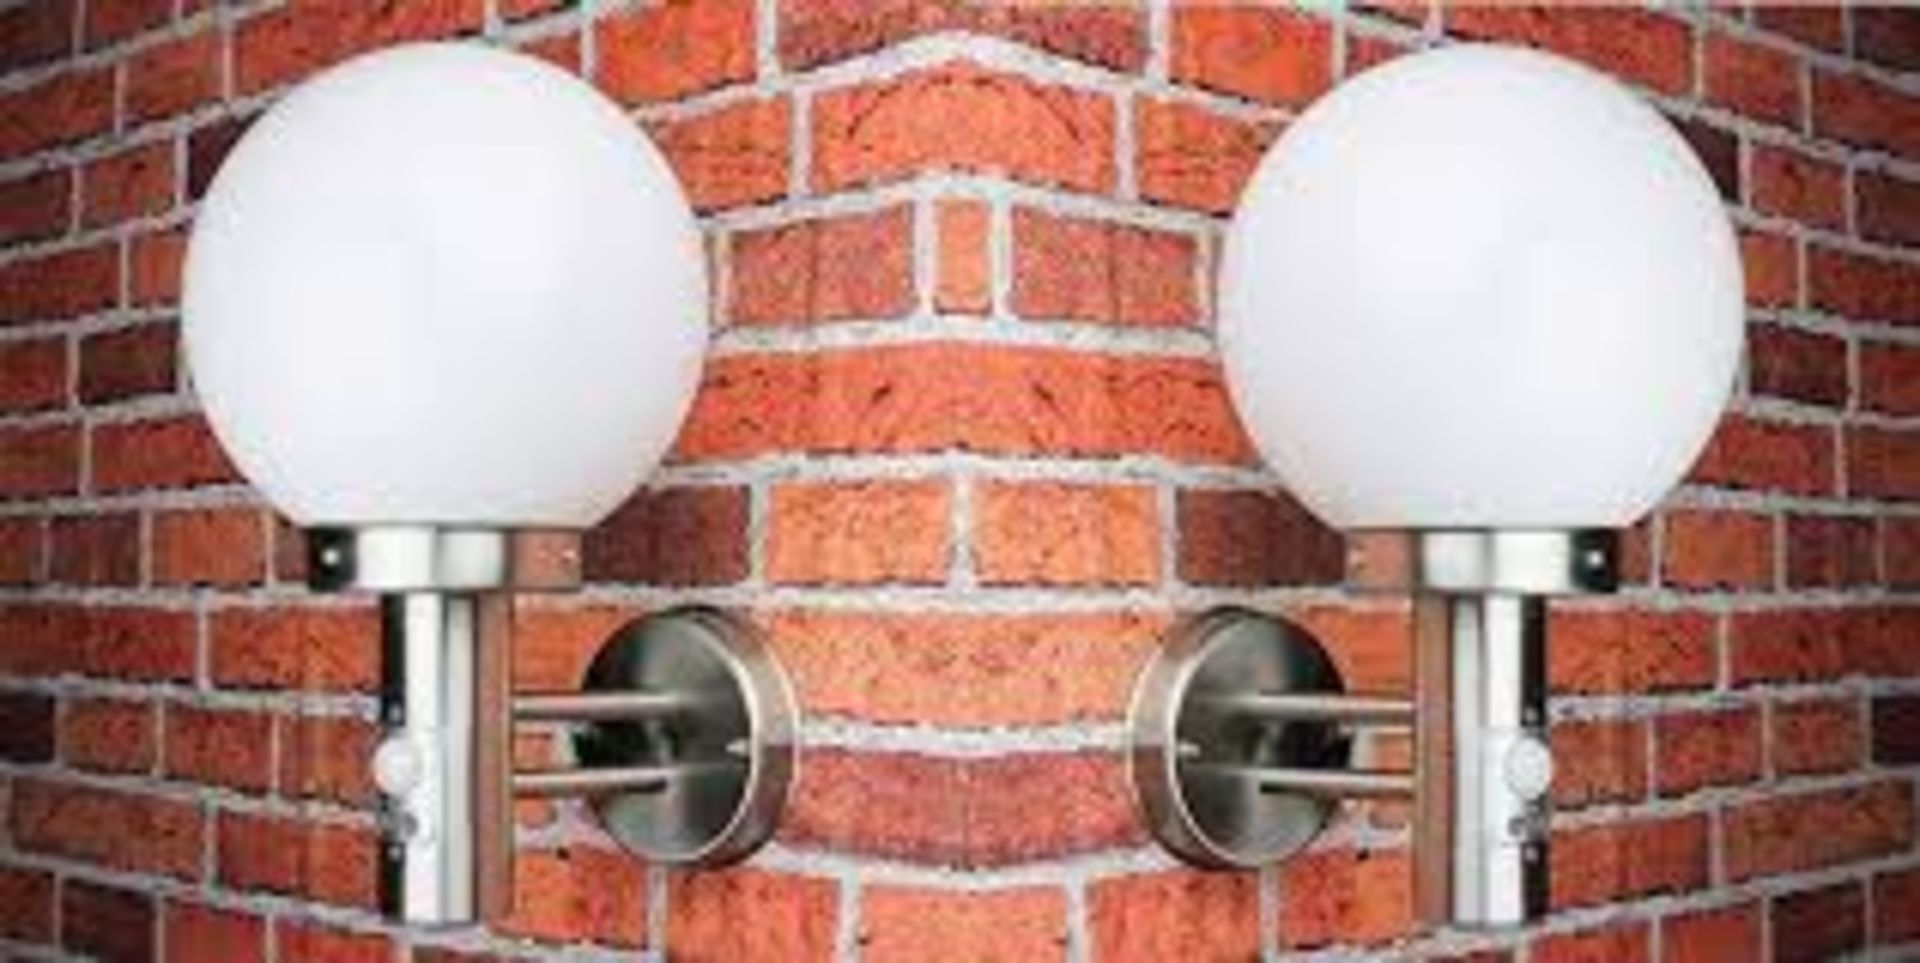 1 x Searchlight Globe Outdoor Wall light in Stainless Steel - Ref: 085 - New Boxed - RRP: £75 (each) - Image 4 of 4